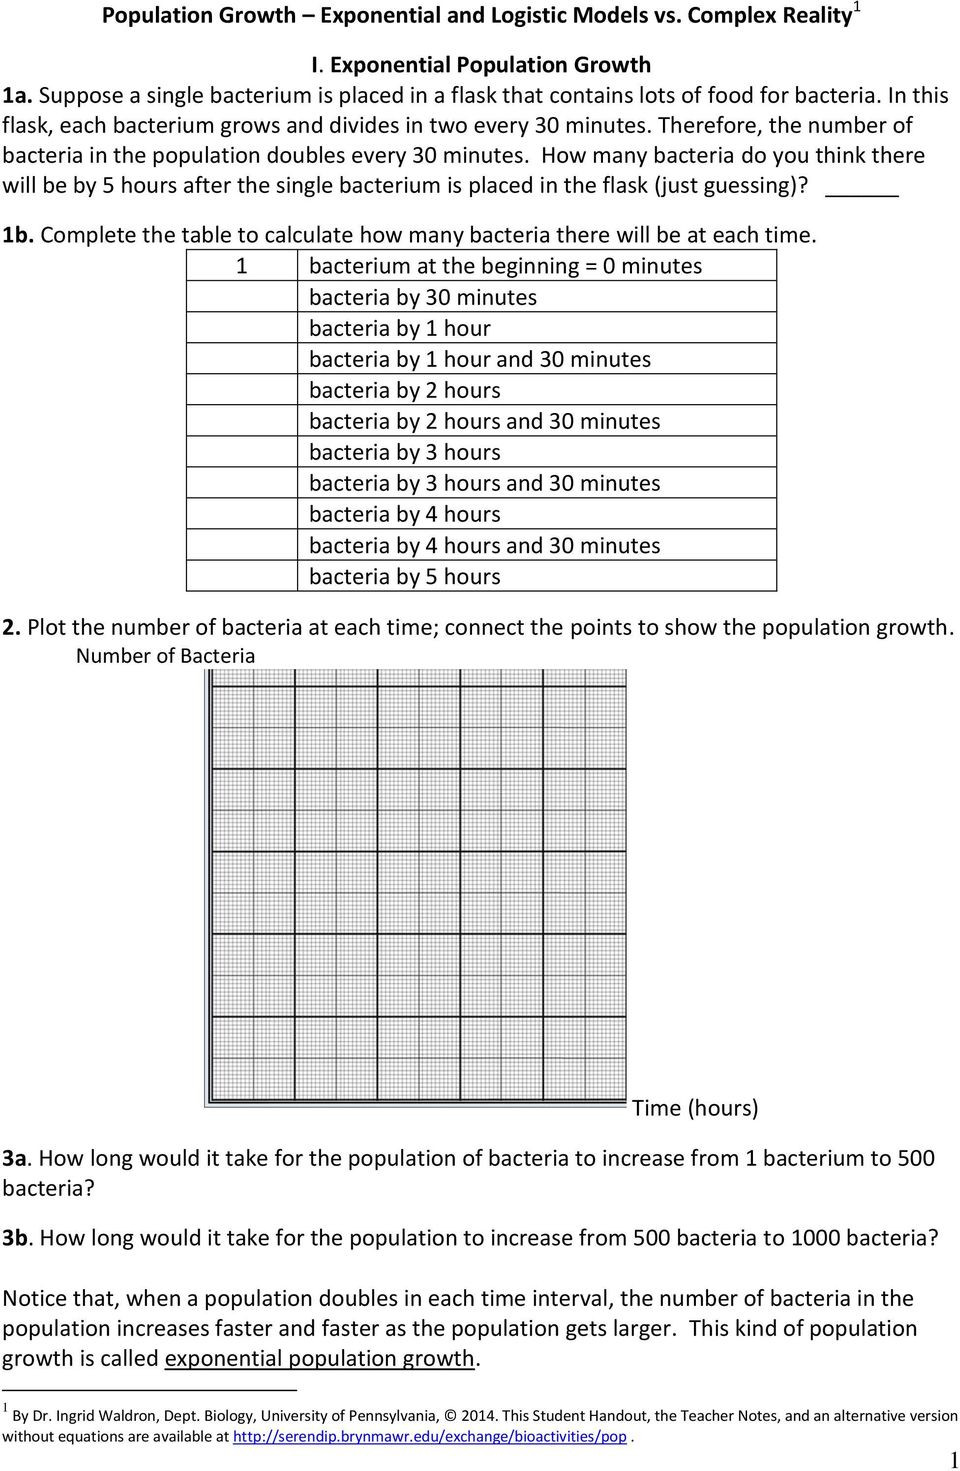 Population Growth Worksheet Answers Population Growth Exponential and Logistic Models Vs